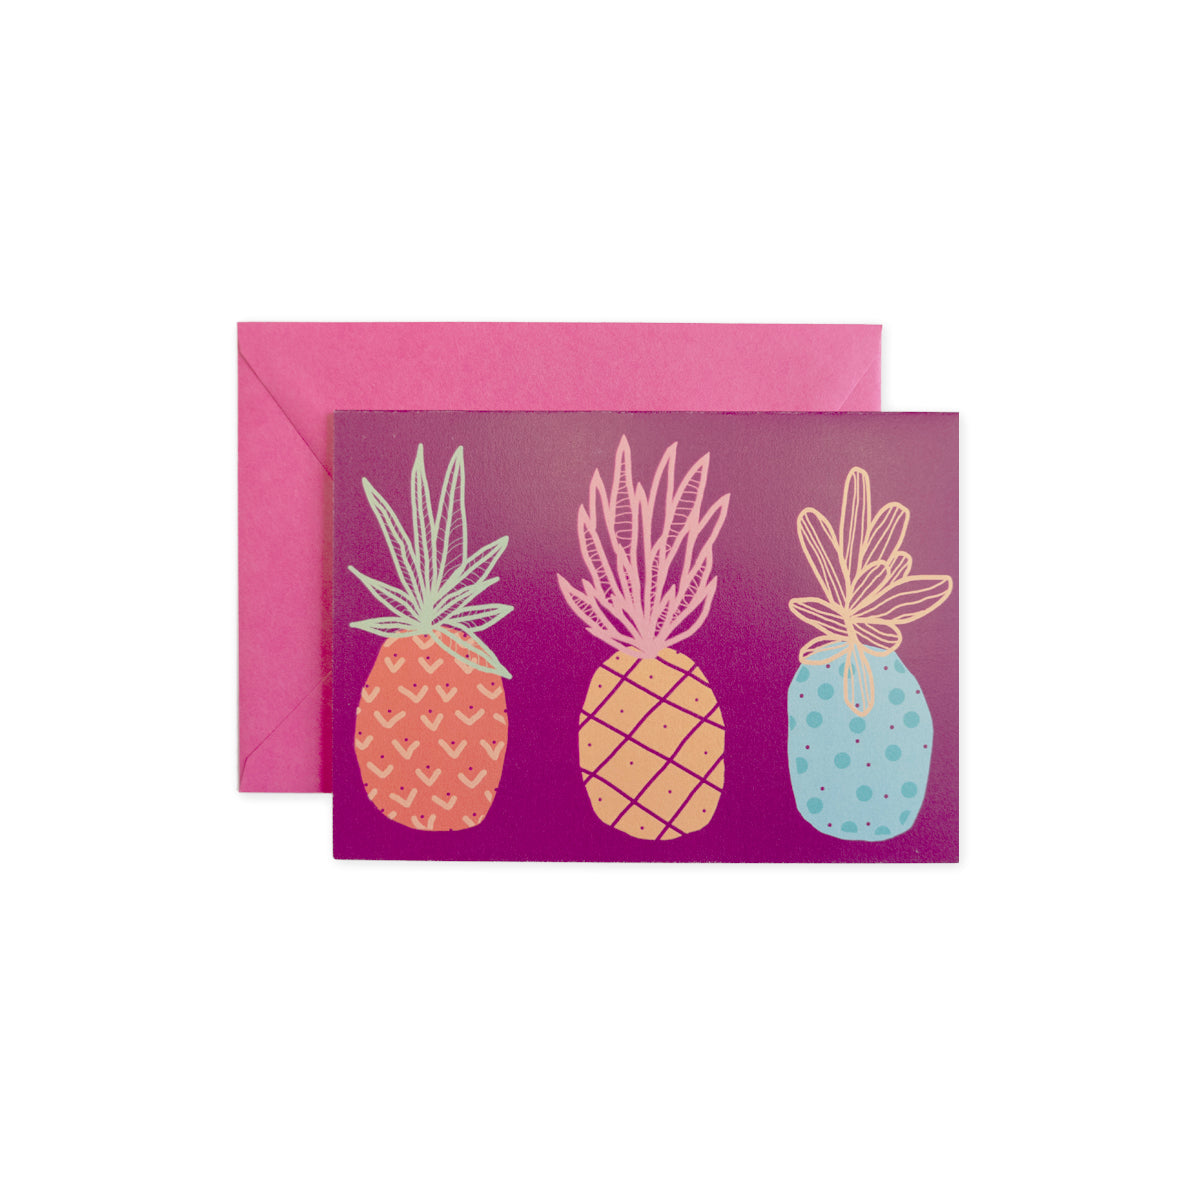 purple greeting card with three cute pineapple illustrations in orange, blue and yellow